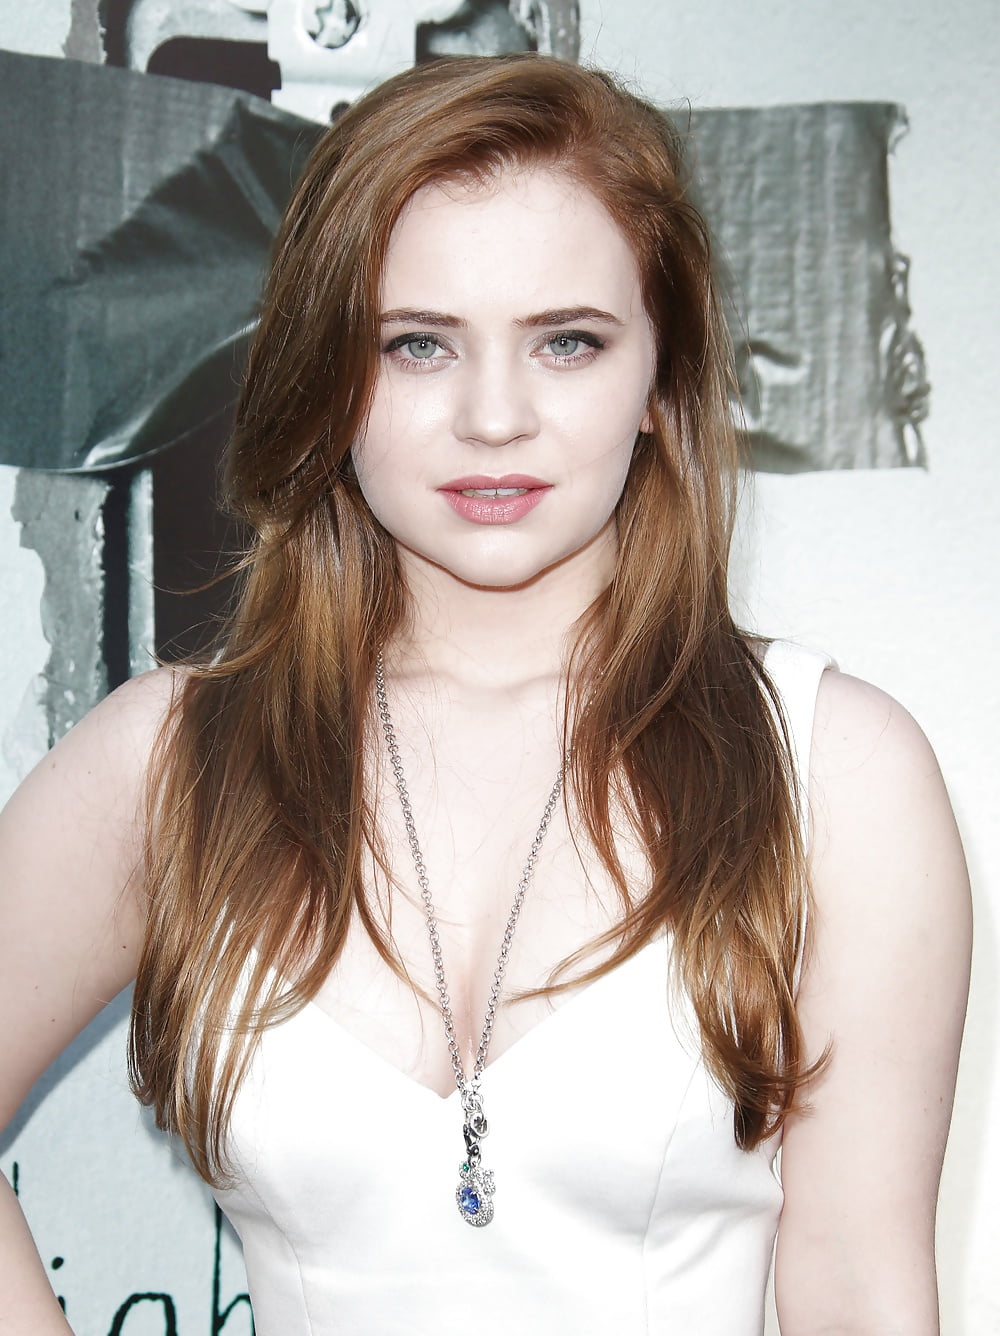 See and Save As sexy sierra mccormick x porn pict - 4crot.com